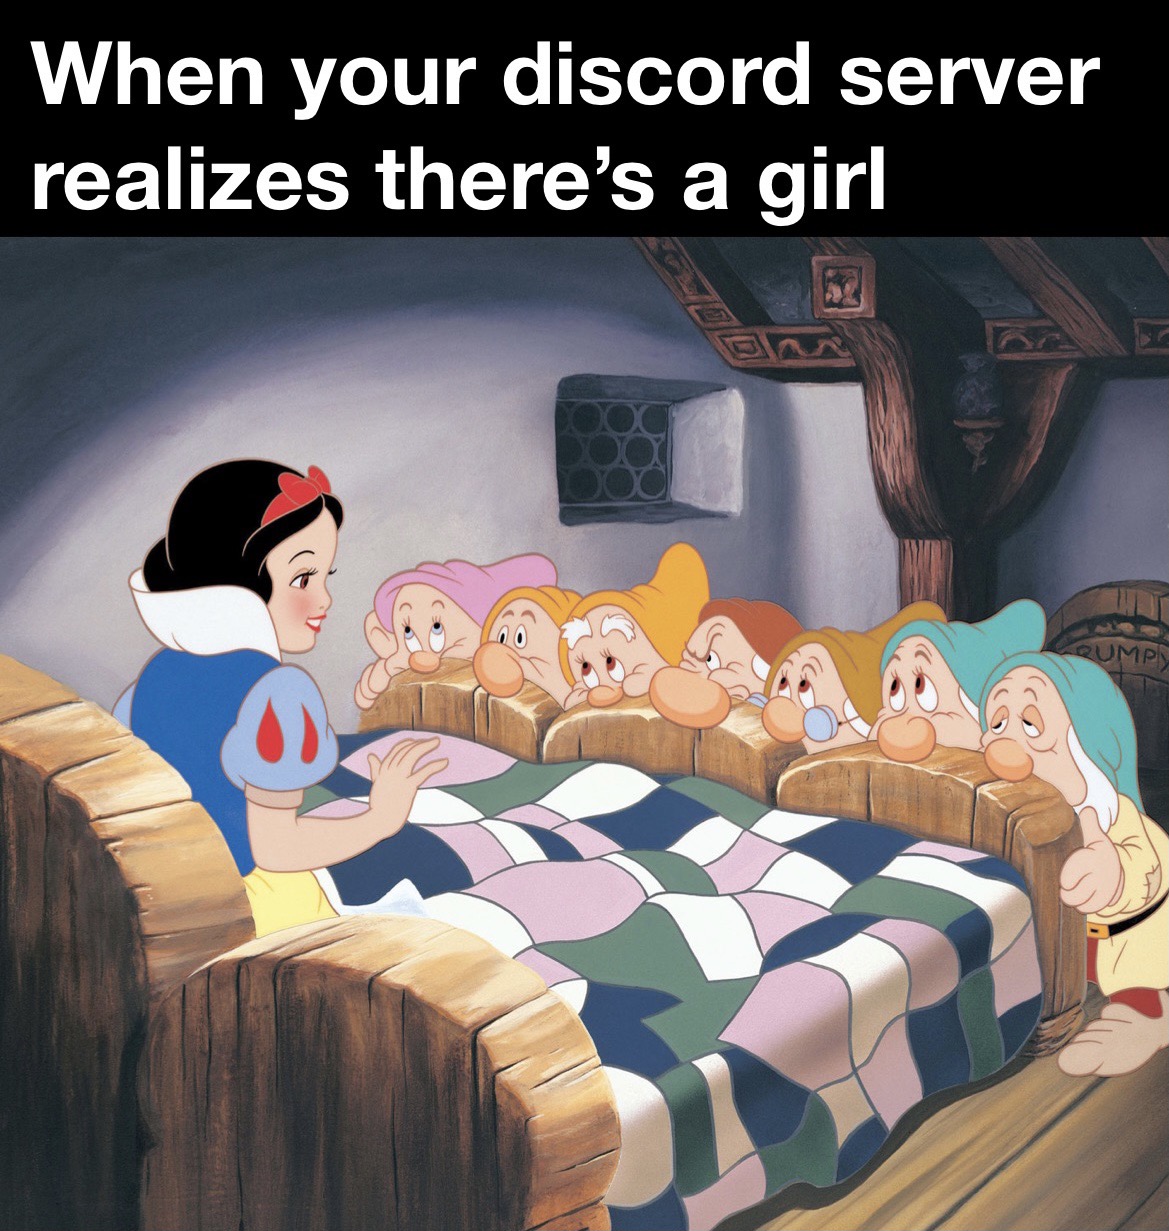 snow white scenes cartoon - When your discord server realizes there's a girl Qumpy